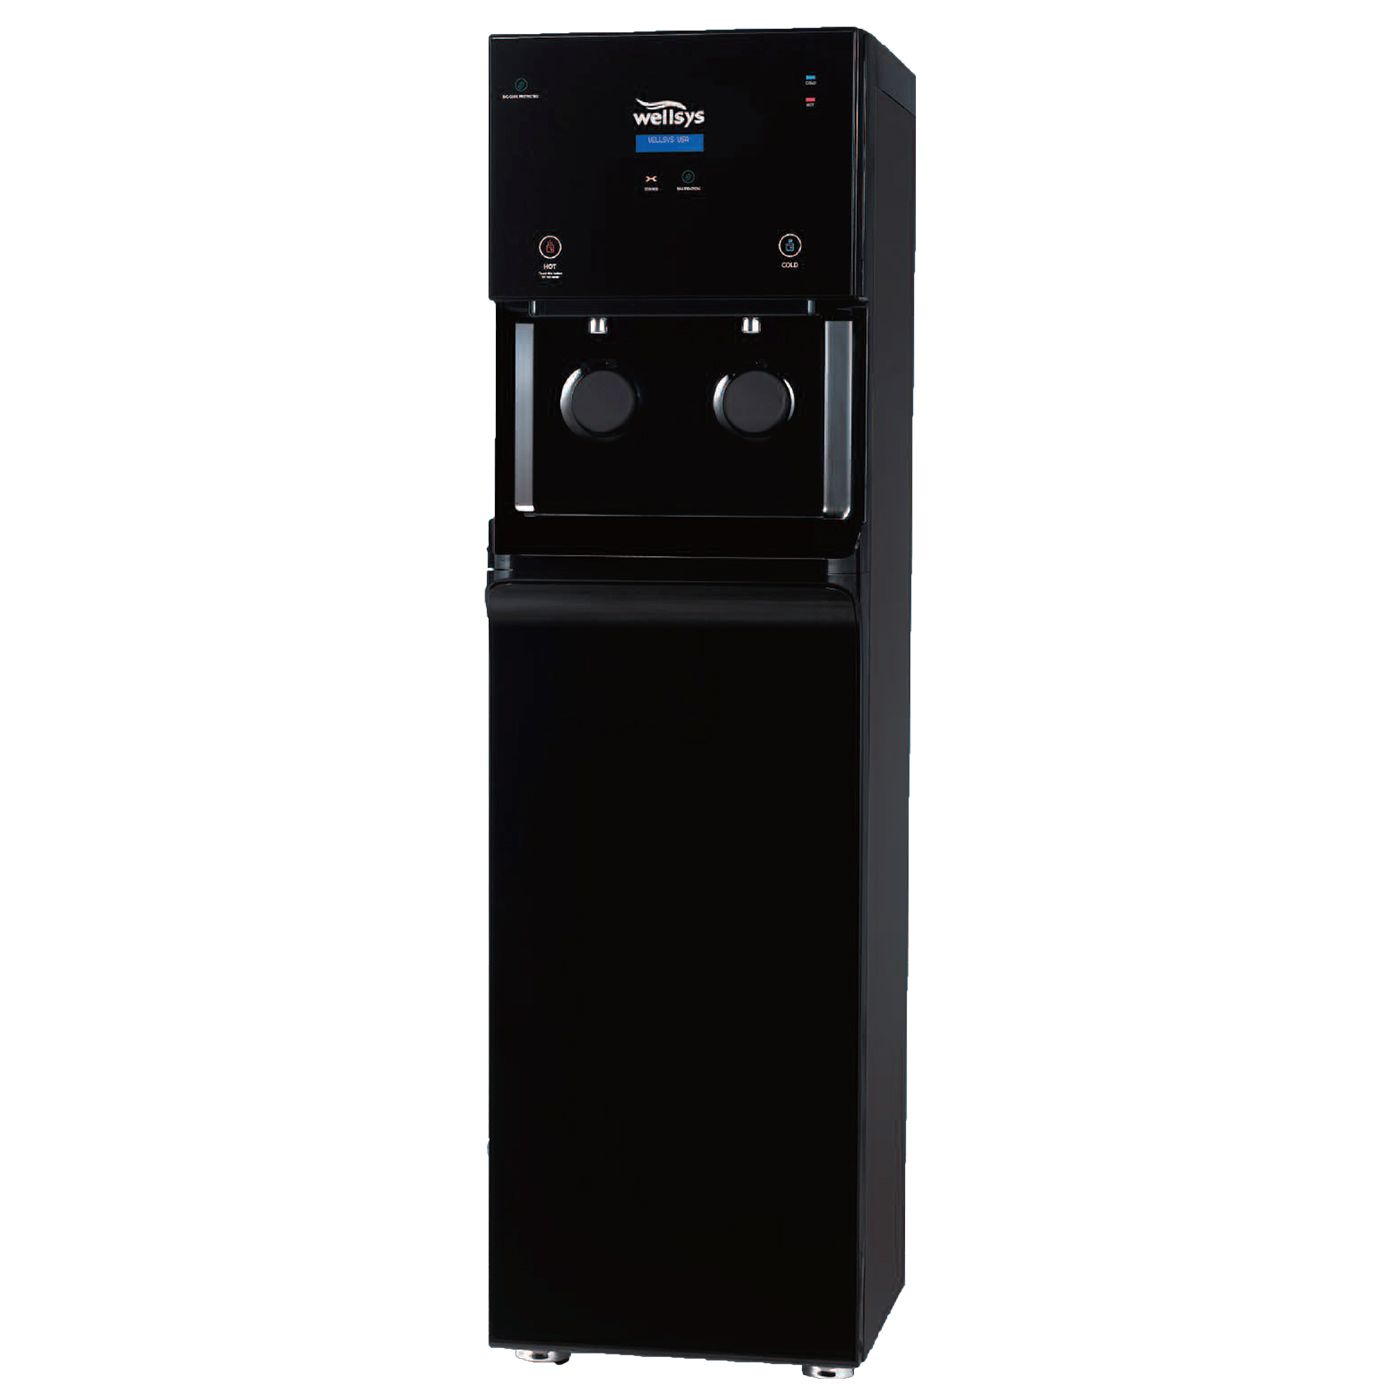 wellsys water filtration system